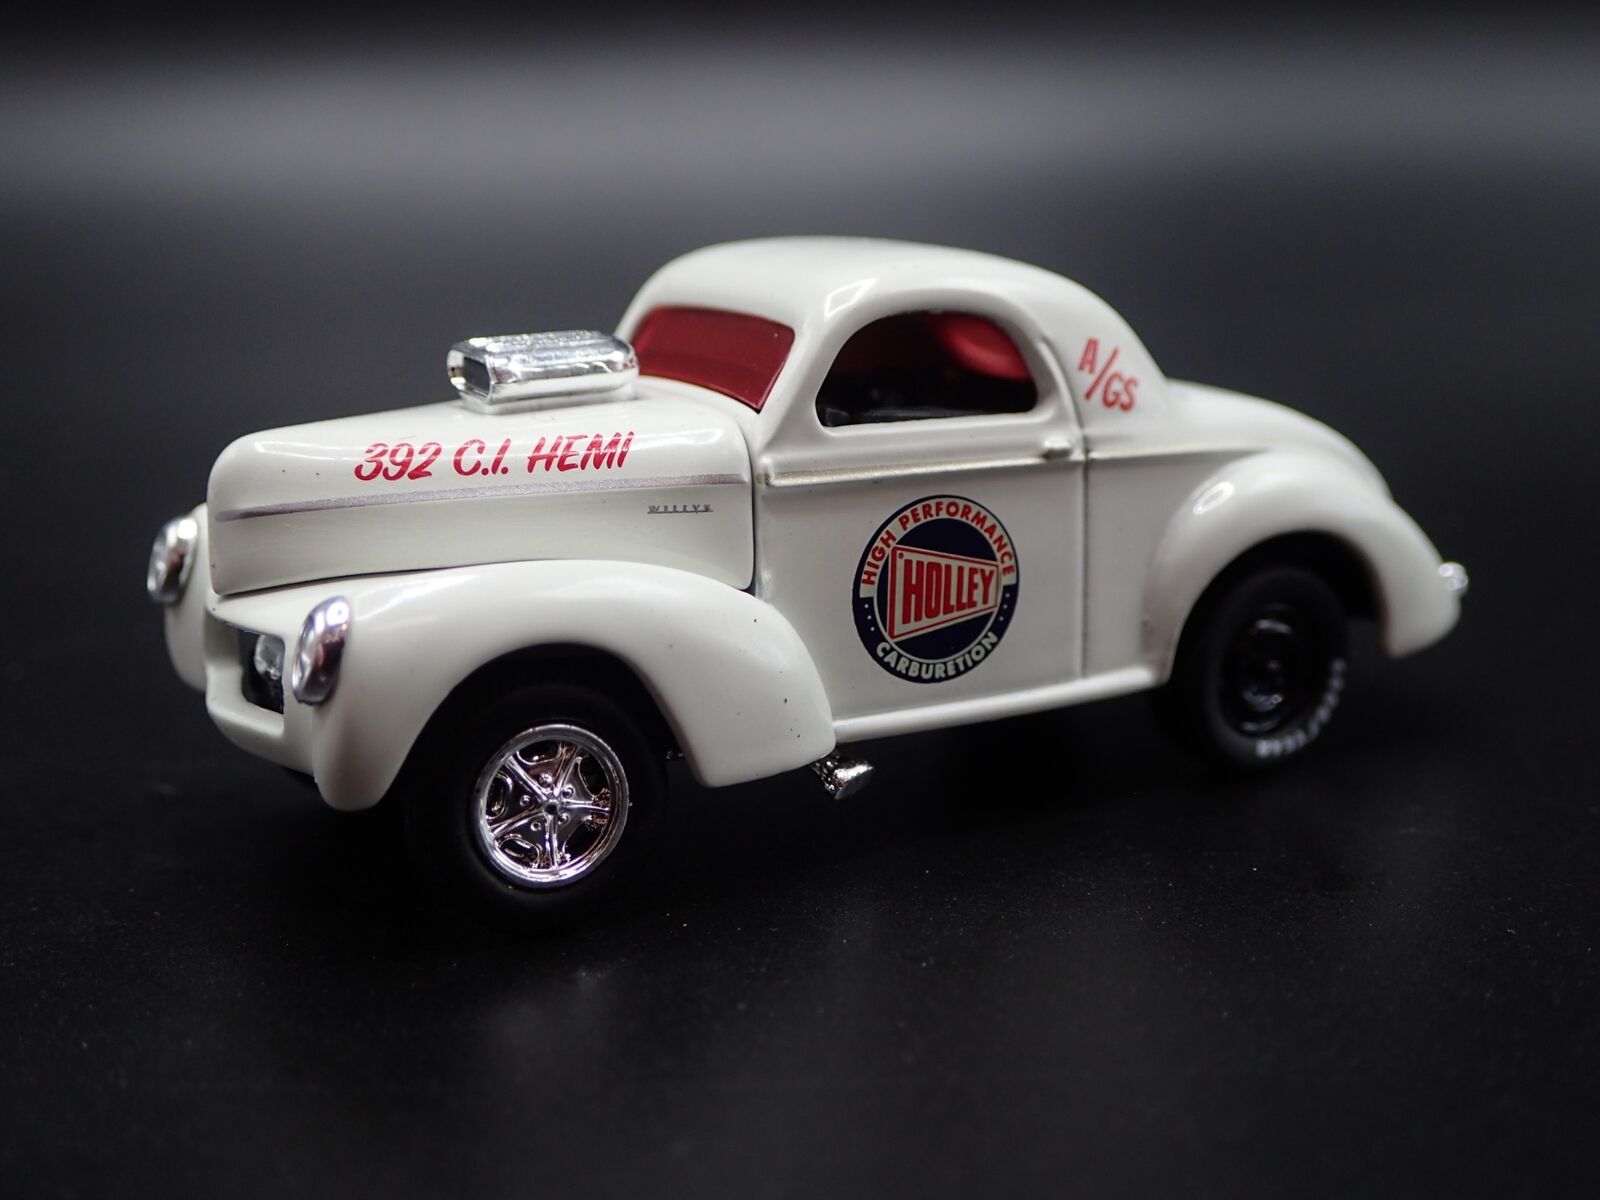 1941 41 WILLYS COUPE GASSERS HOLLEY RARE 1:64 SCALE DIORAMA DIECAST MODEL CAR